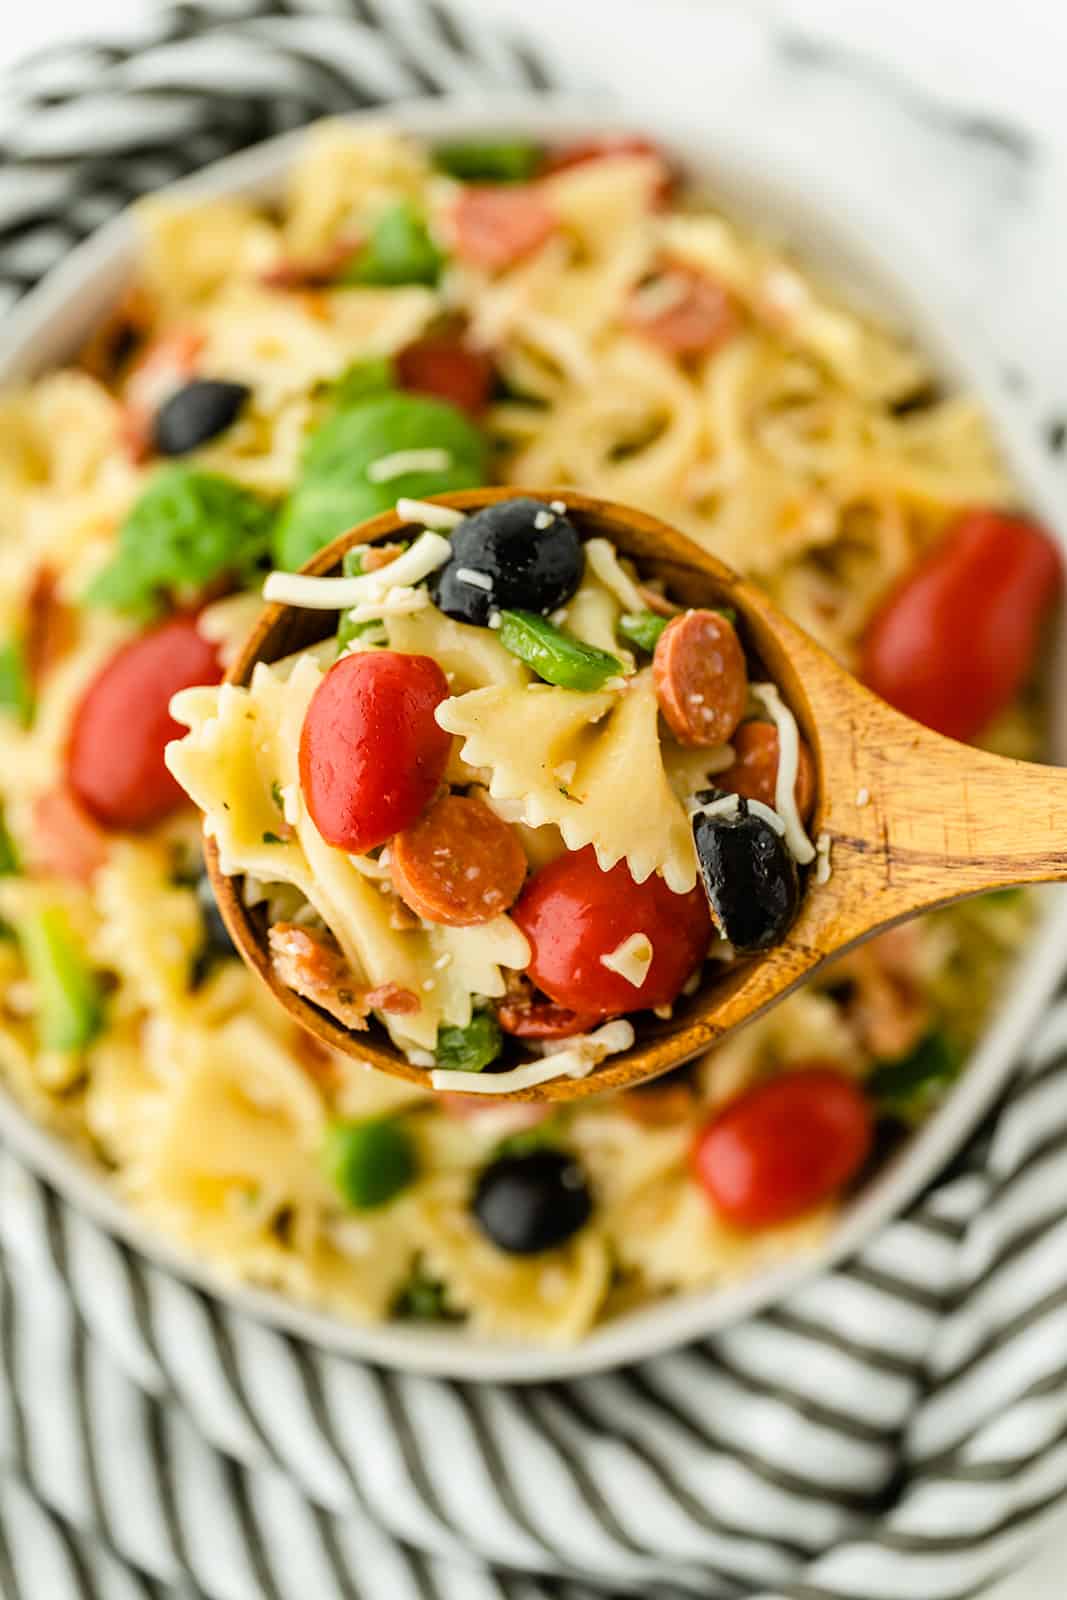 Pizza Pasta Salad - A perfect summer dish with all the best pizza flavors! Salty pepperoni and olives are coated in tangy Italian dressing and covered in cheese.